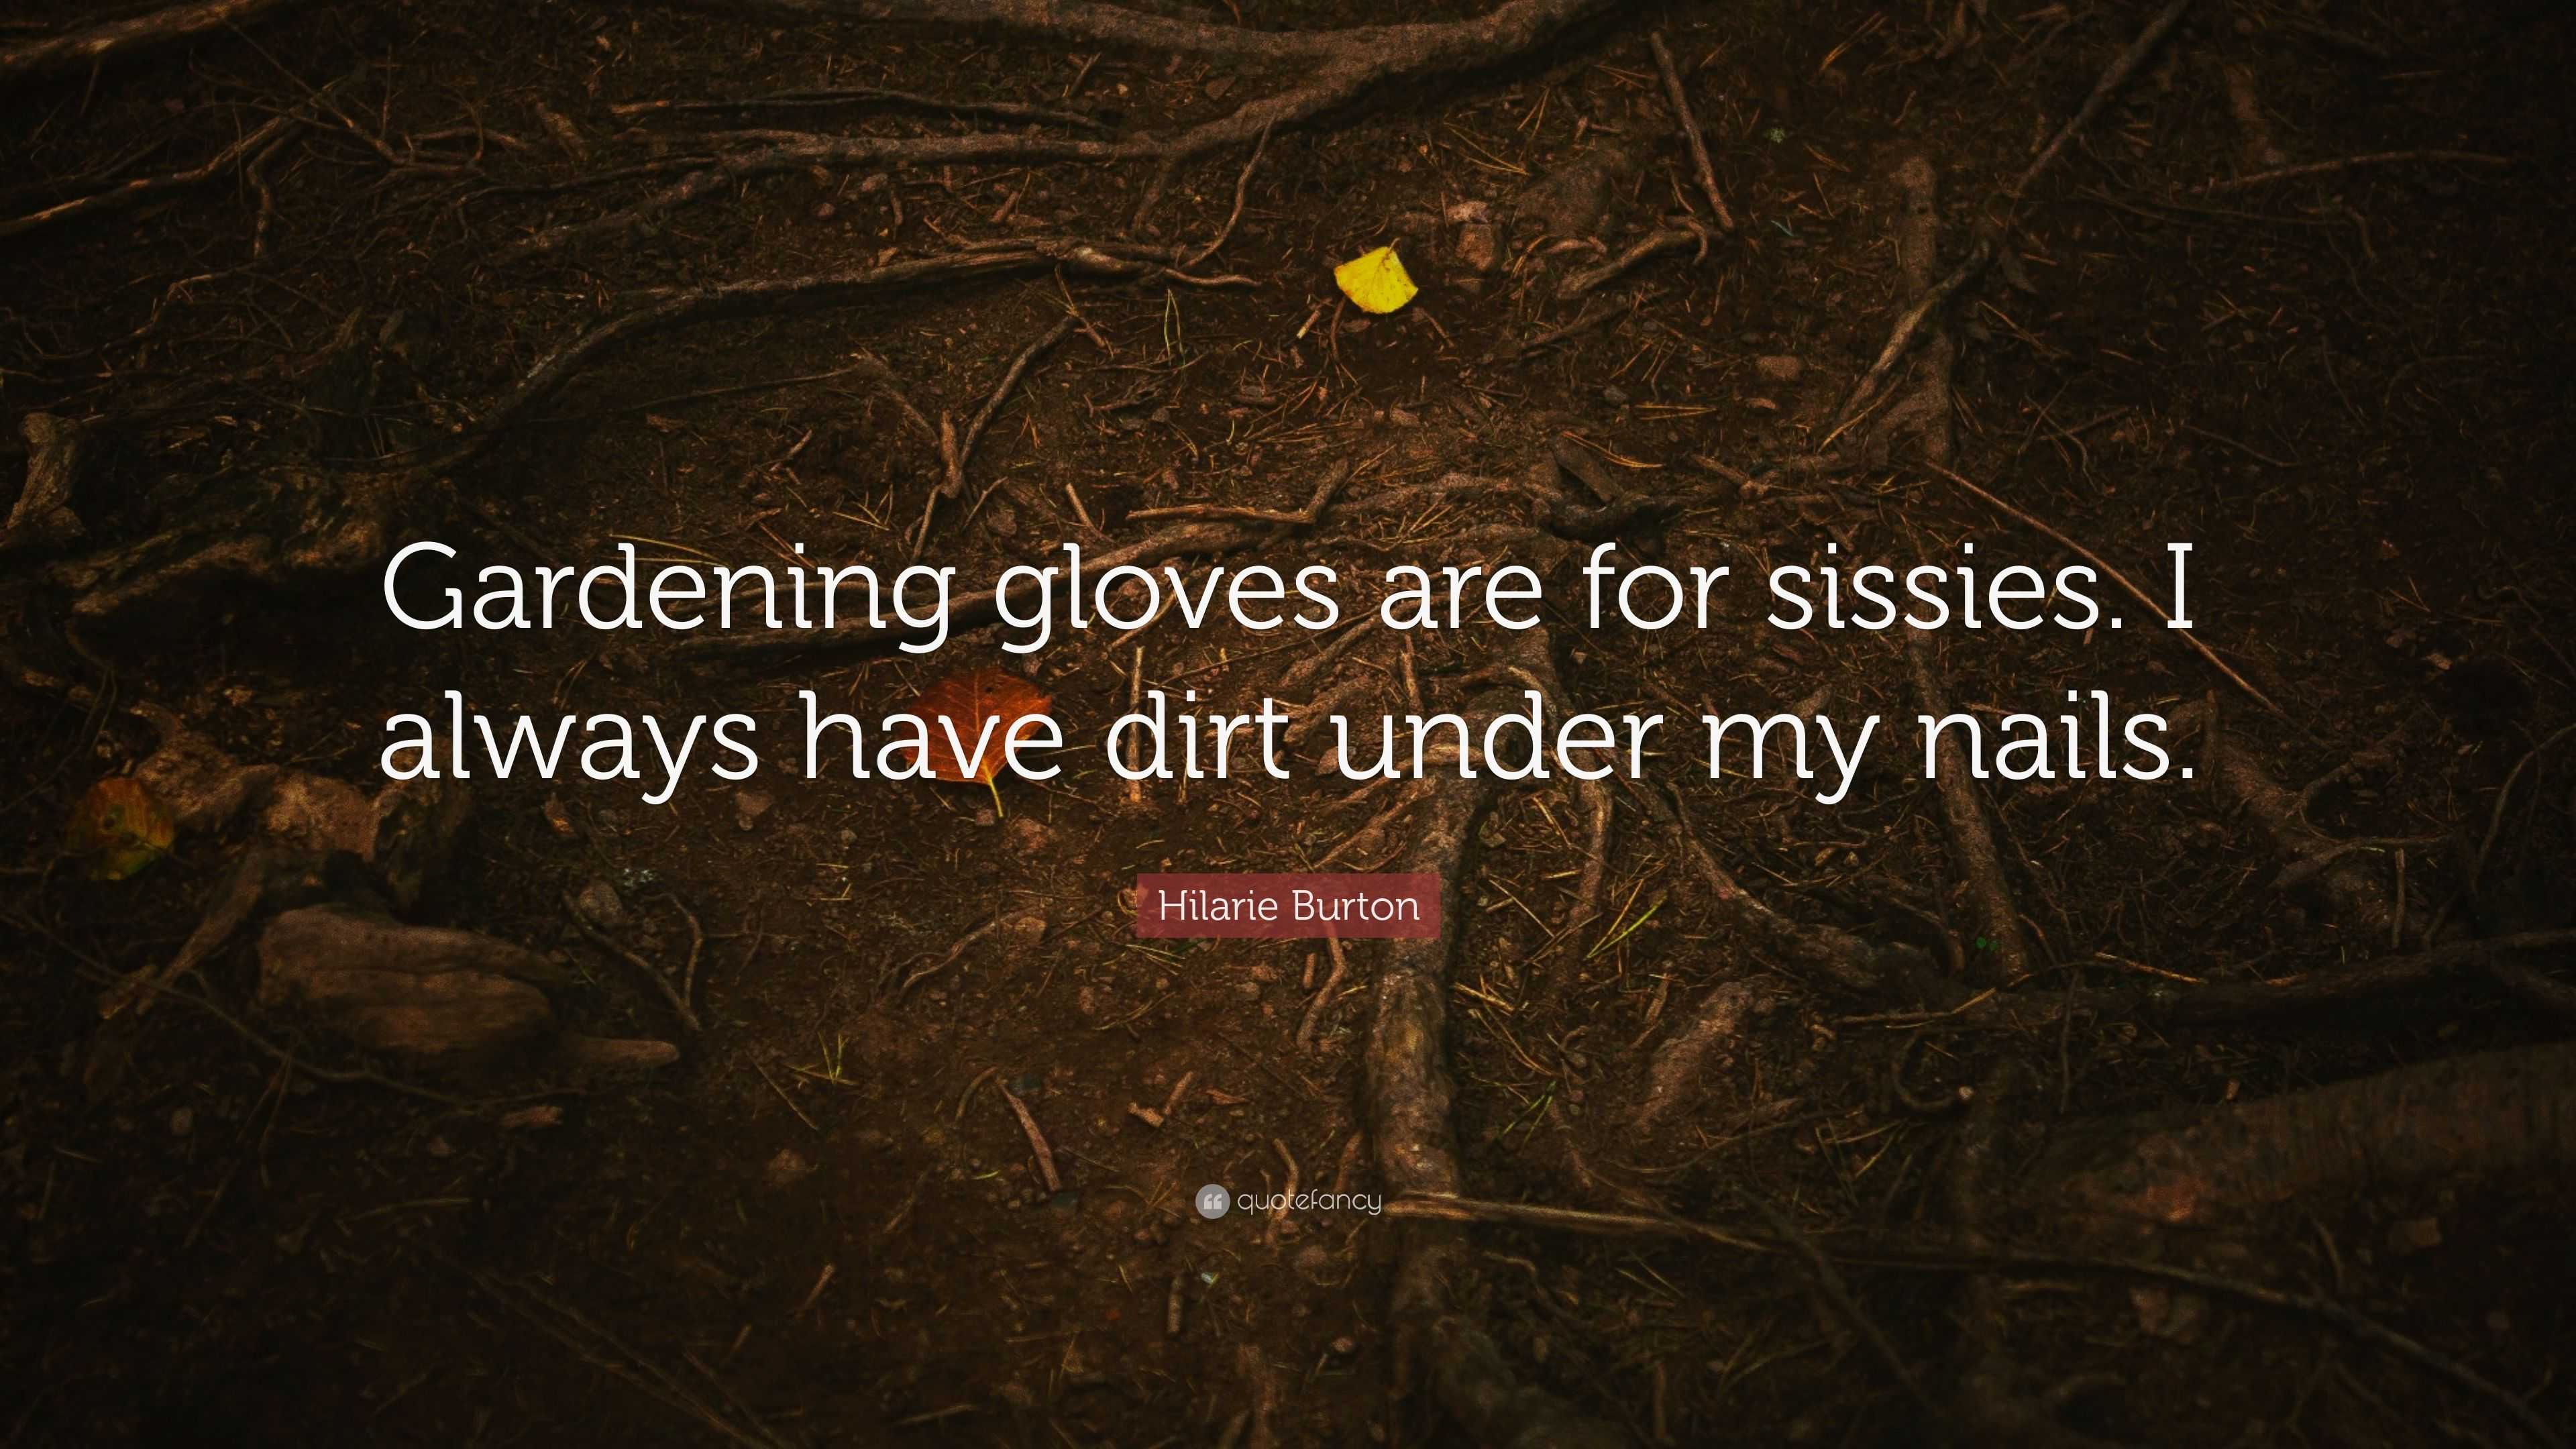 Hilarie Burton Quote: “Gardening gloves are for sissies. I always have dirt  under my nails.”